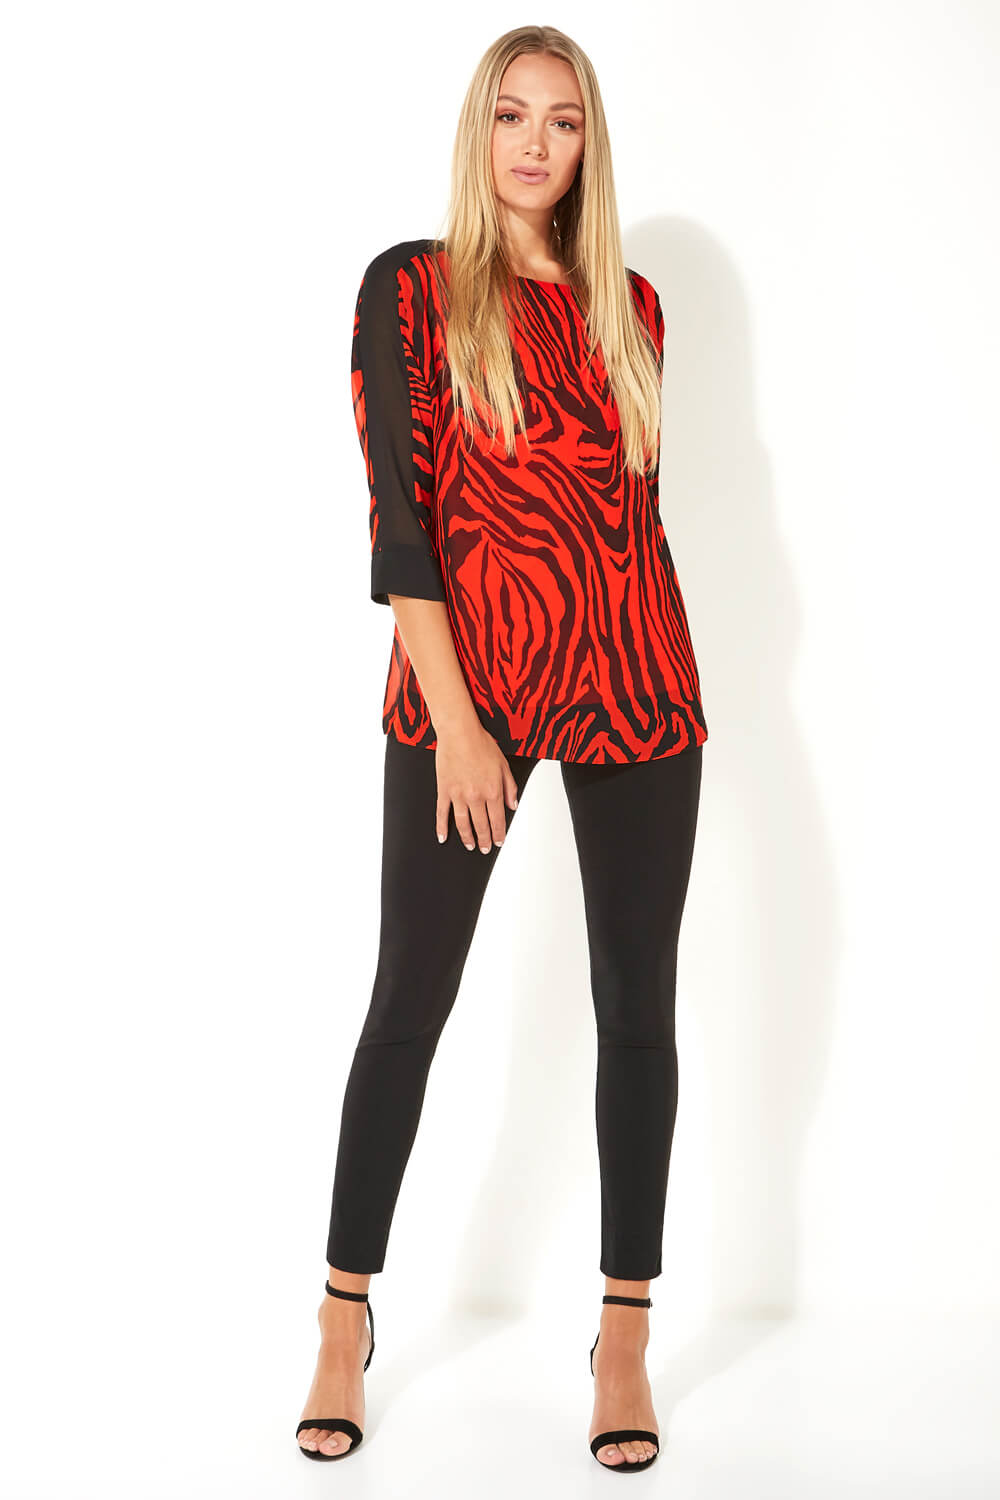 Red Animal Tiger Print 3/4 Sleeve Top, Image 2 of 5